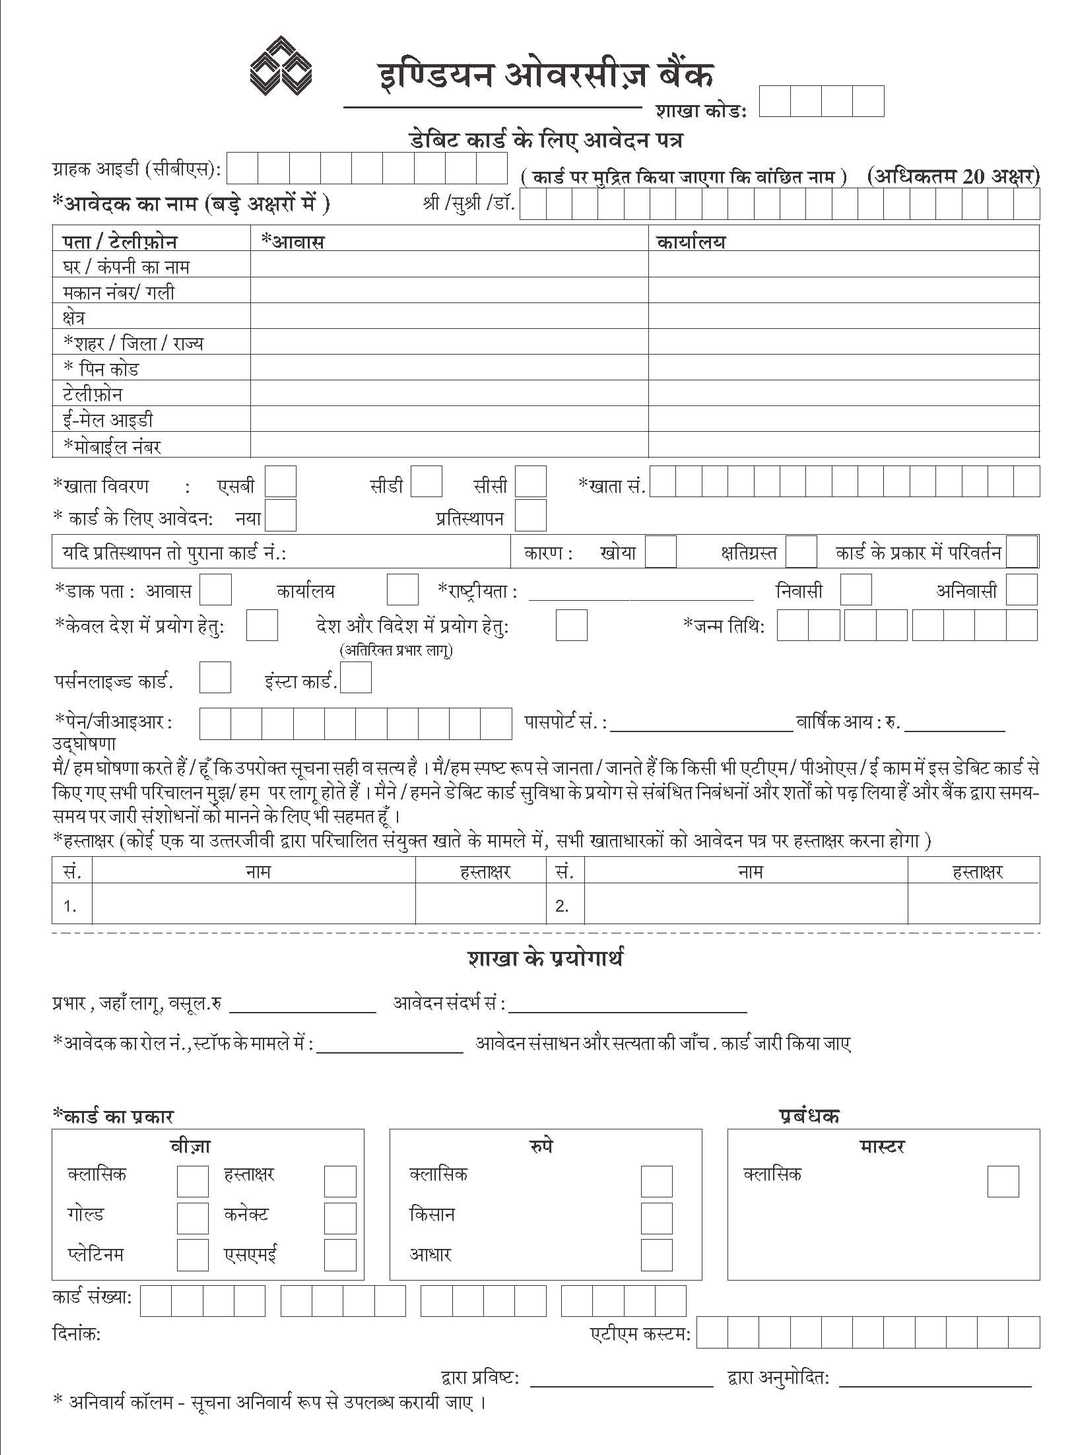 Indian Overseas Bank ATM Card Application Form 2021 2022 Student Forum